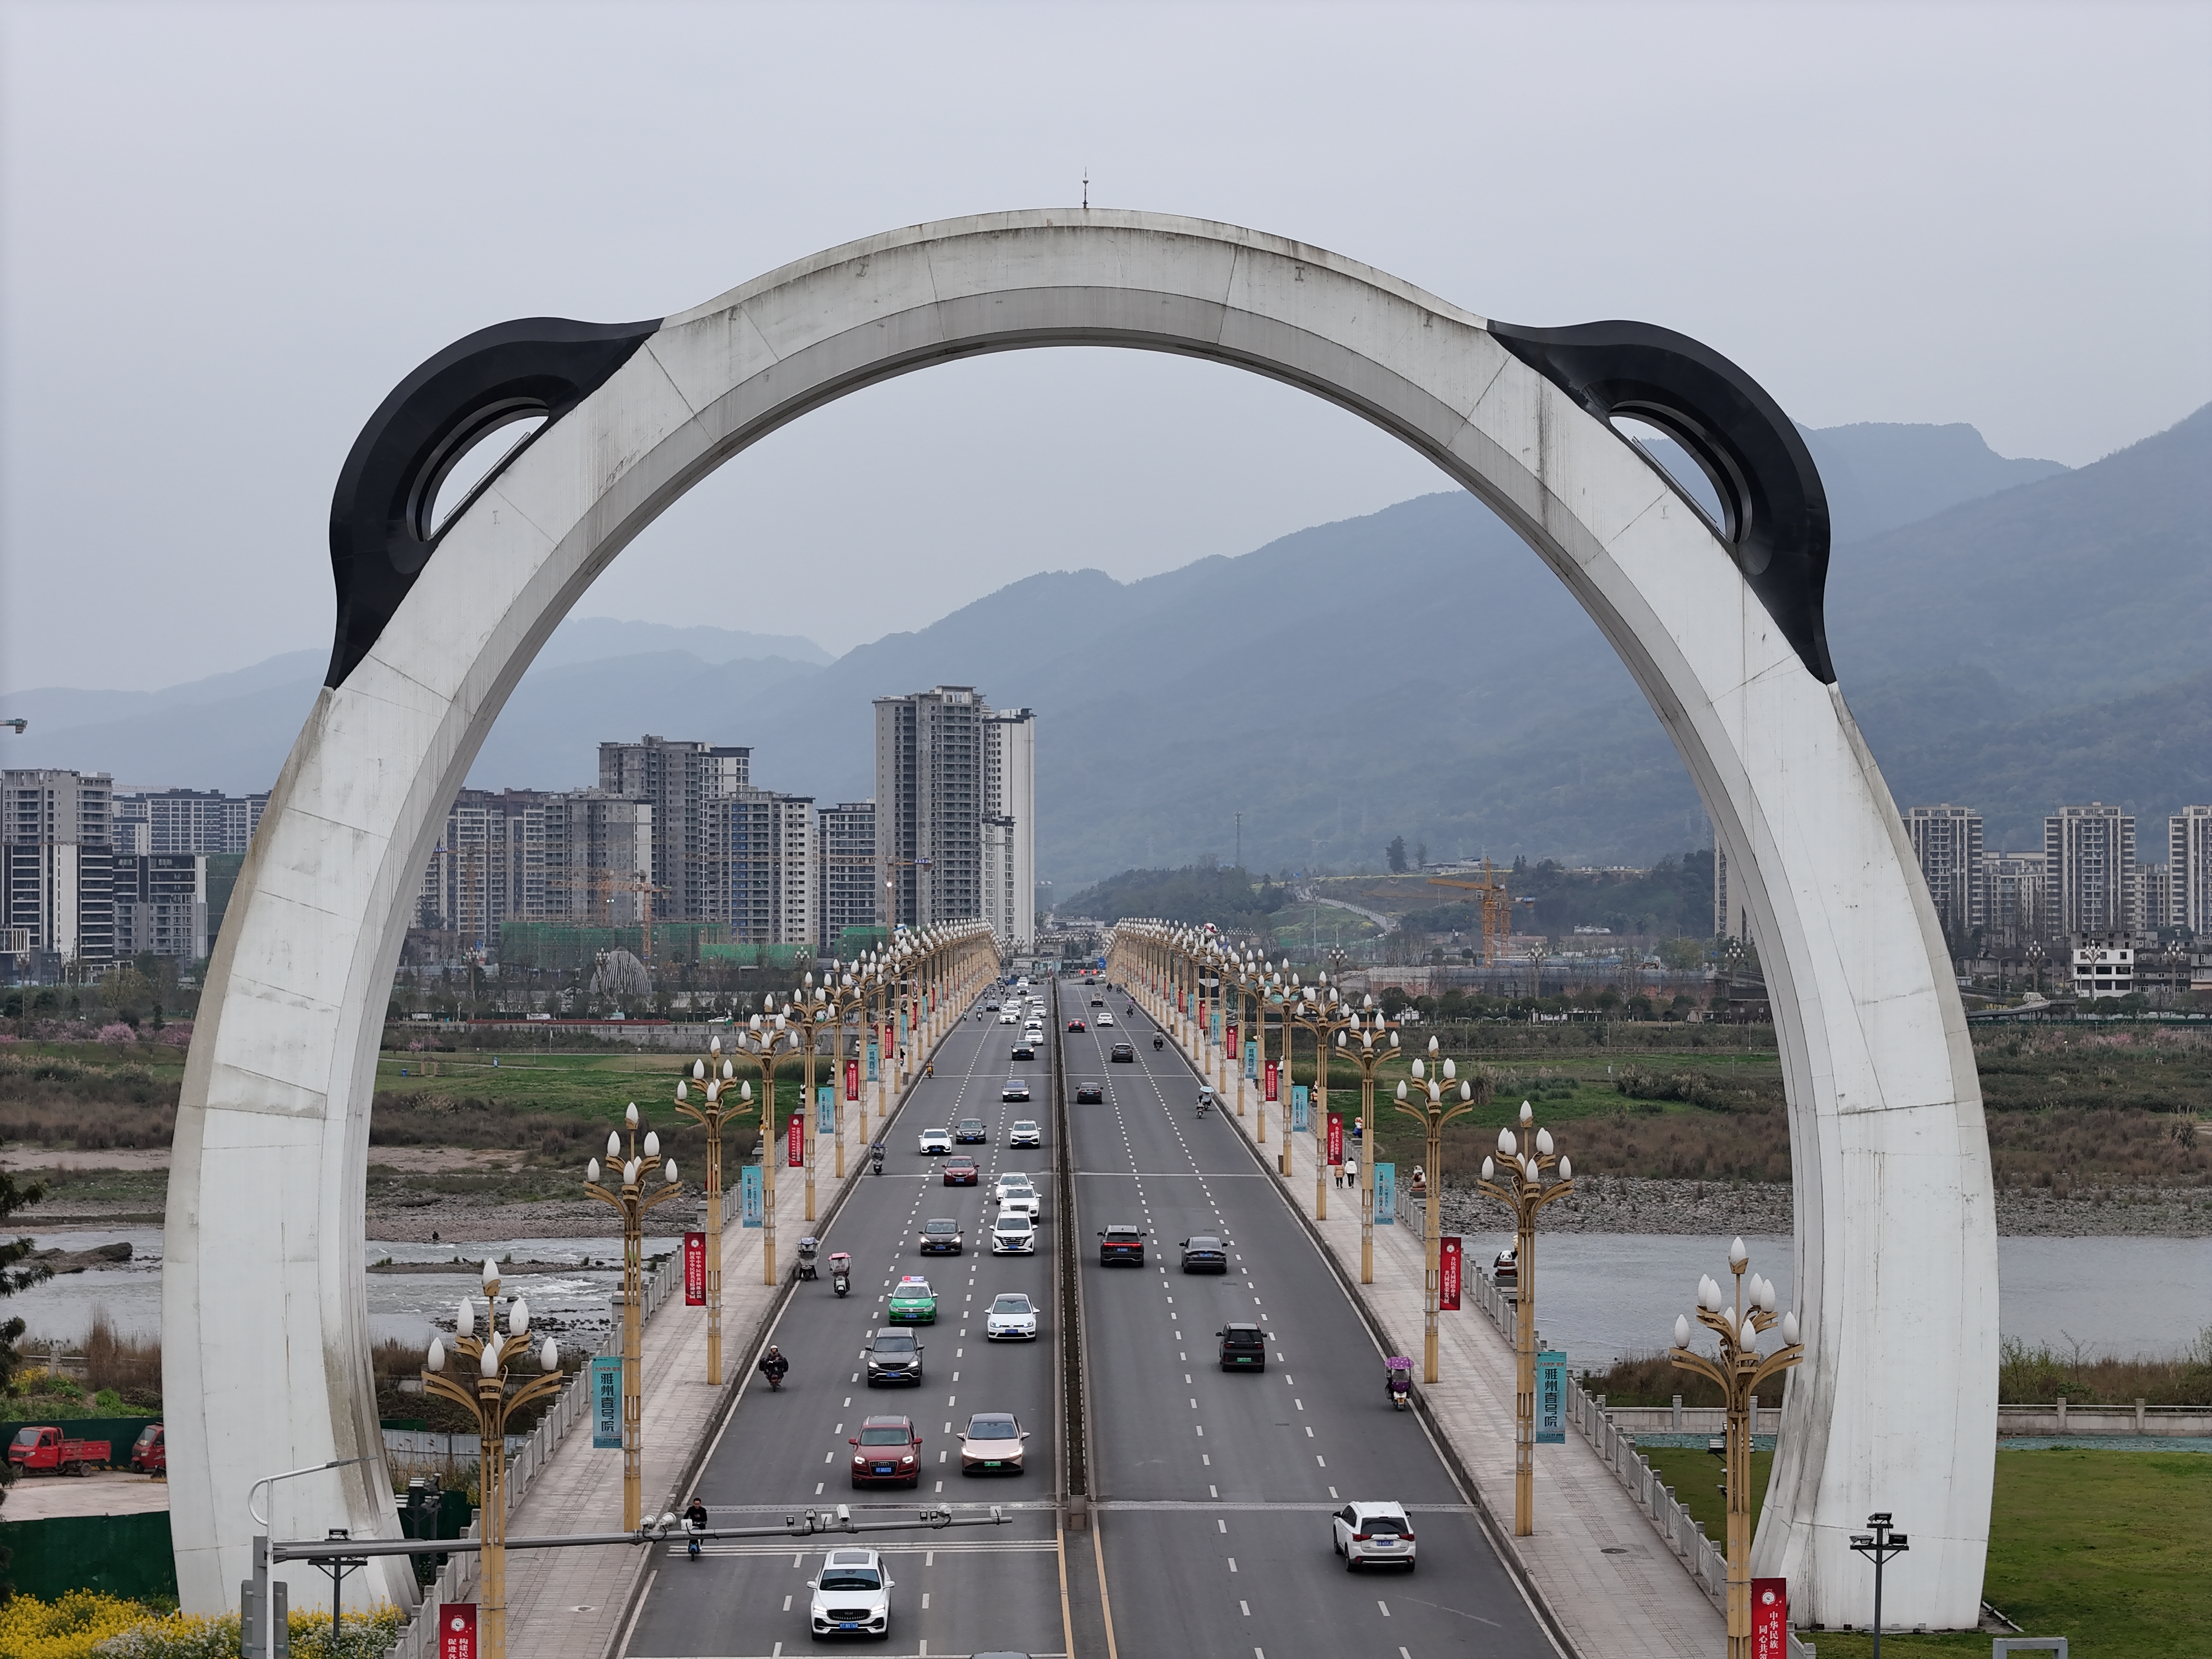 An arch featuring outlines of a panda's head is seen on the Daxing Erqiao Bridge stretching over the Qingyi River in Yucheng District, Ya'an City of southwest China's Sichuan Province on March 24, 2024. /IC